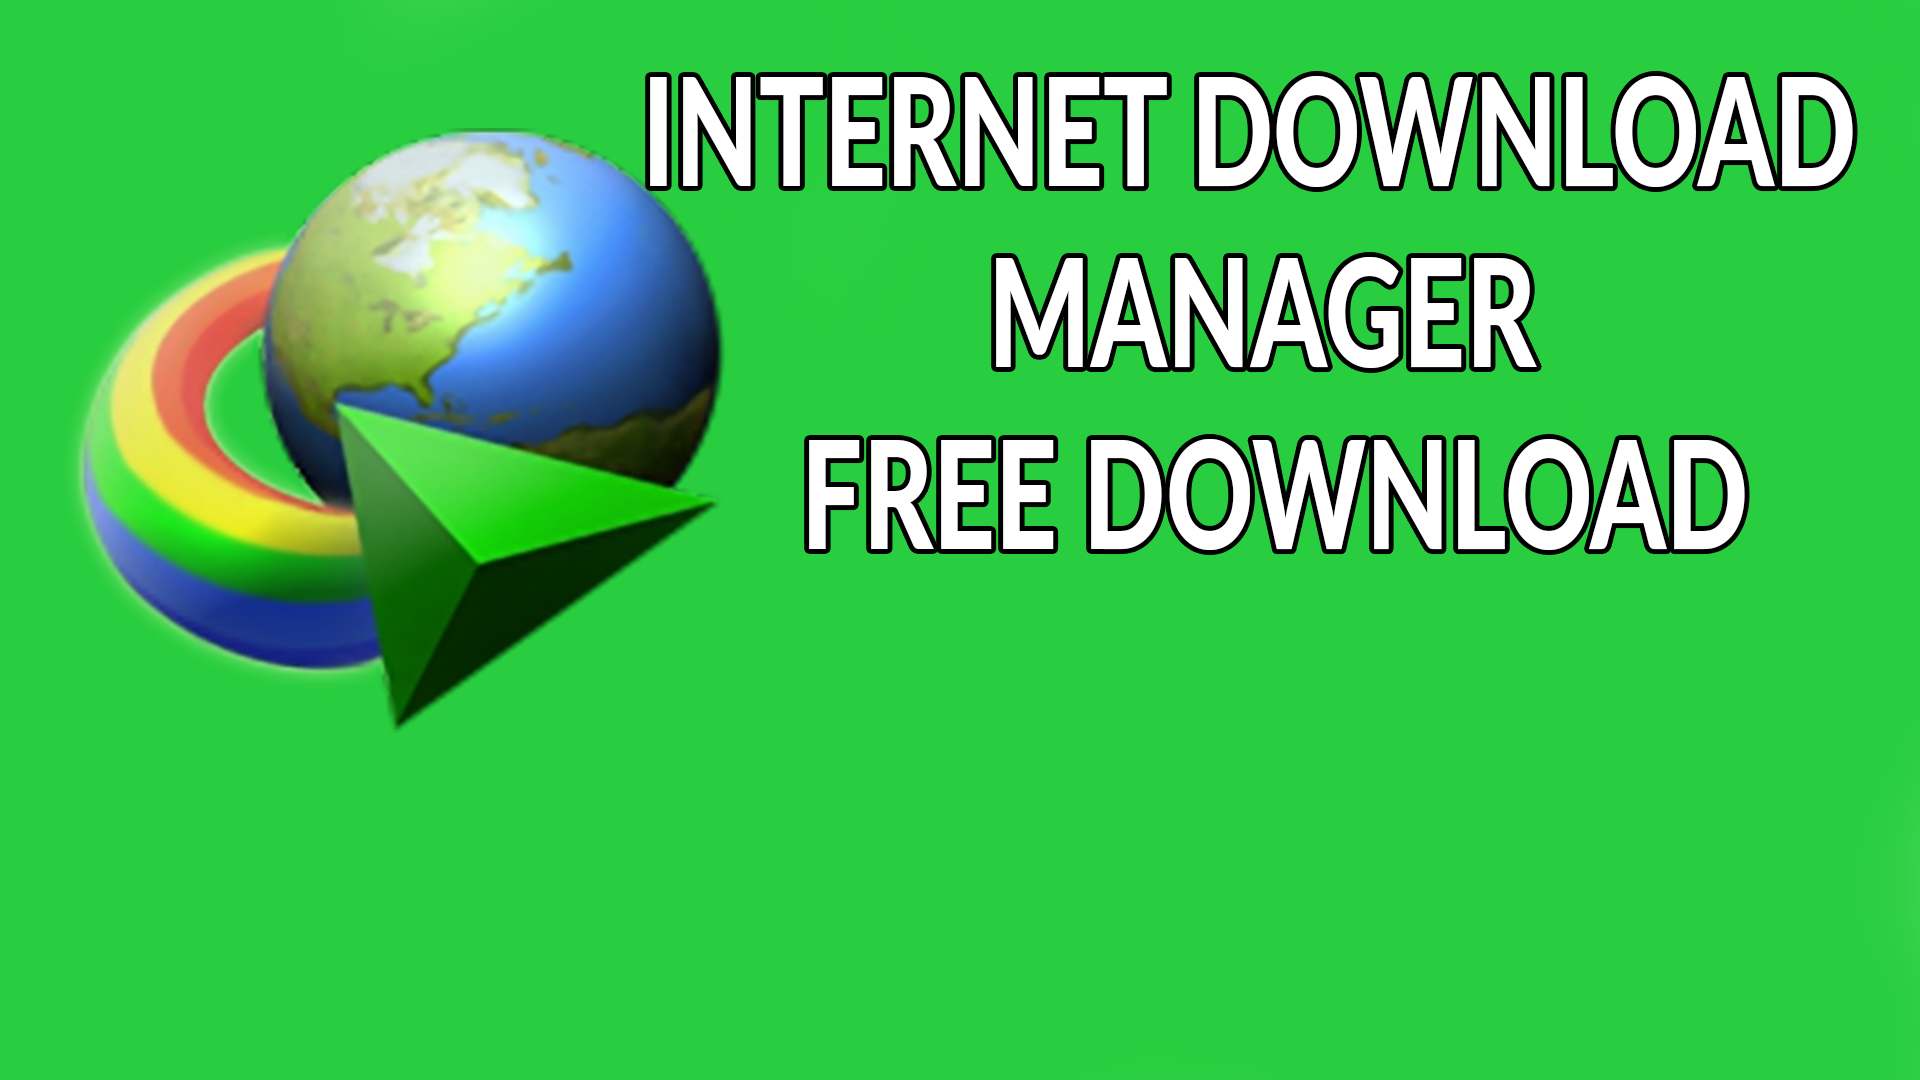 internet download manager new version 2012 free download full version